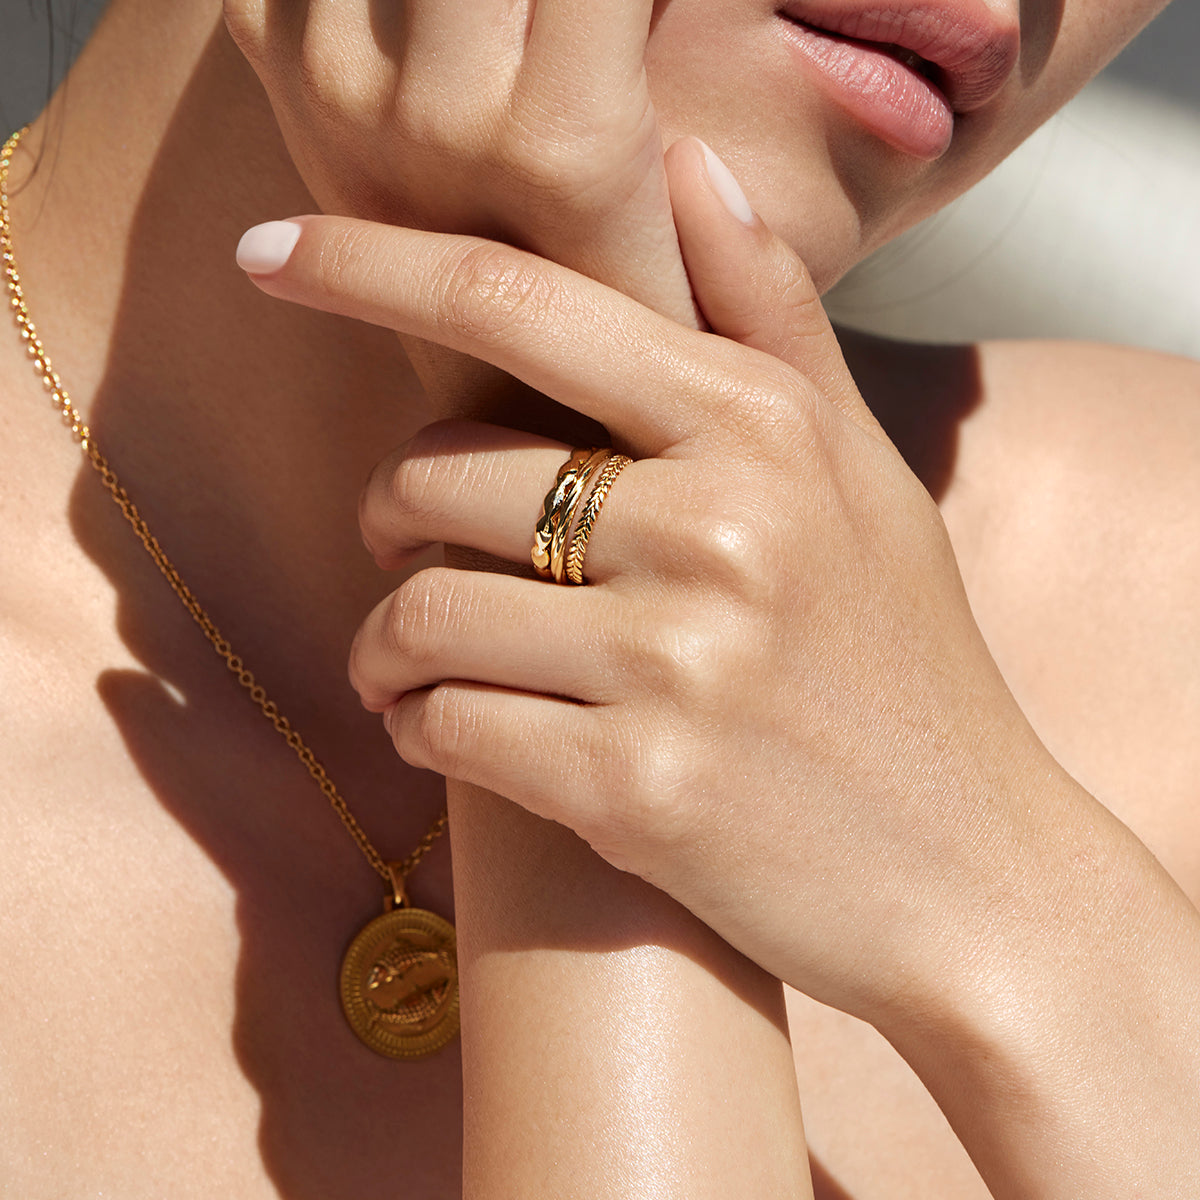 Woman Holding Her Hands by Her Chin Wearing Ethical Gold Band Rings and an Ethical Gold Pisces Pendant Necklace